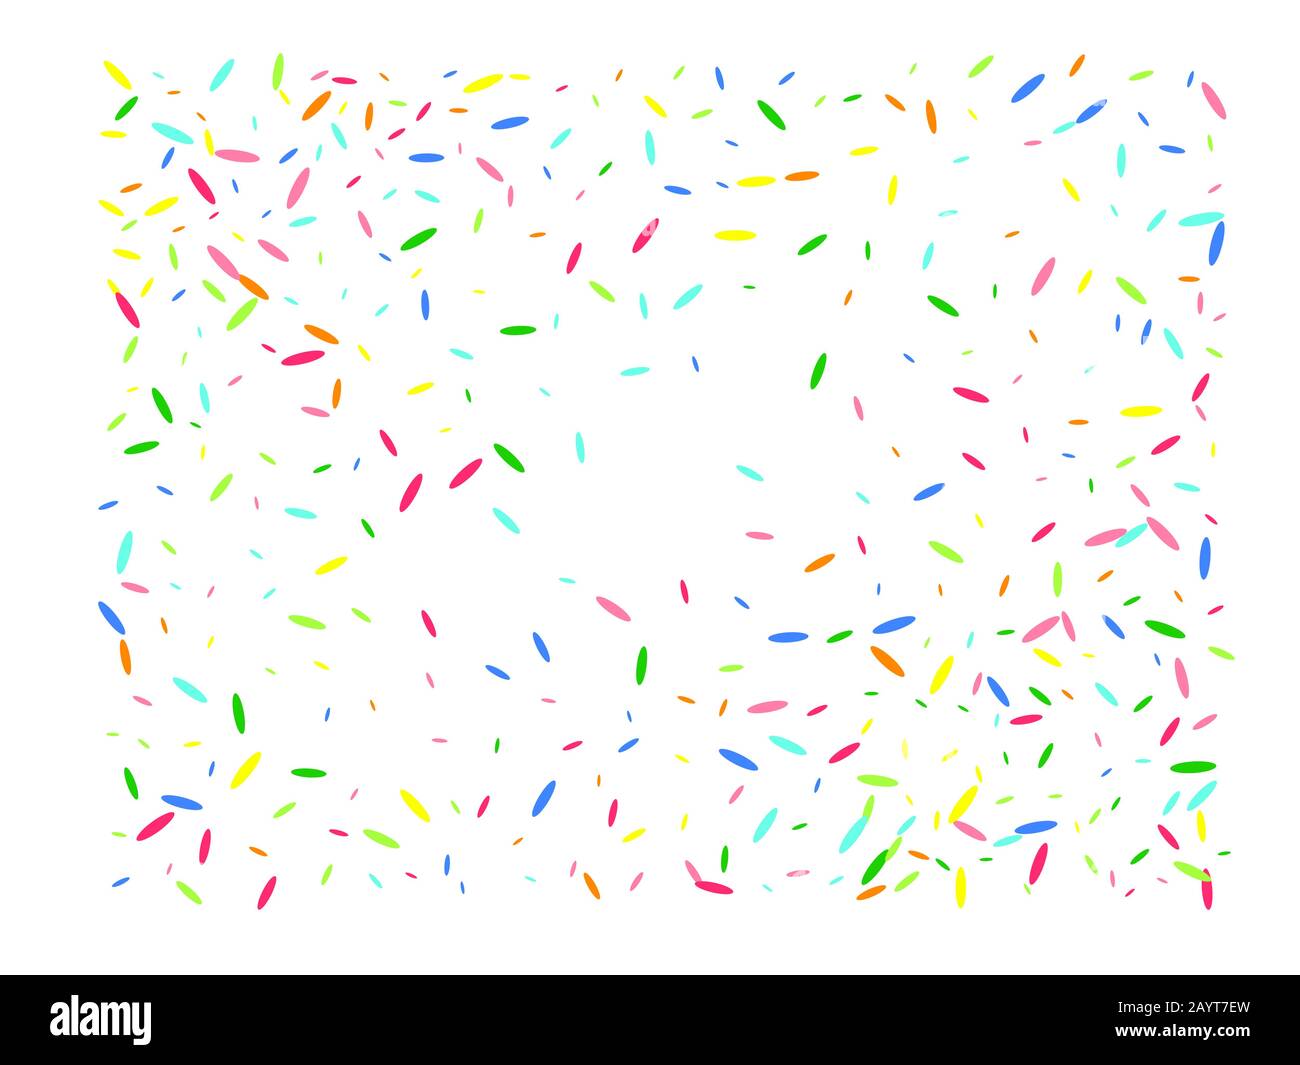 Confetti Photos Download The BEST Free Confetti Stock Photos  HD Images